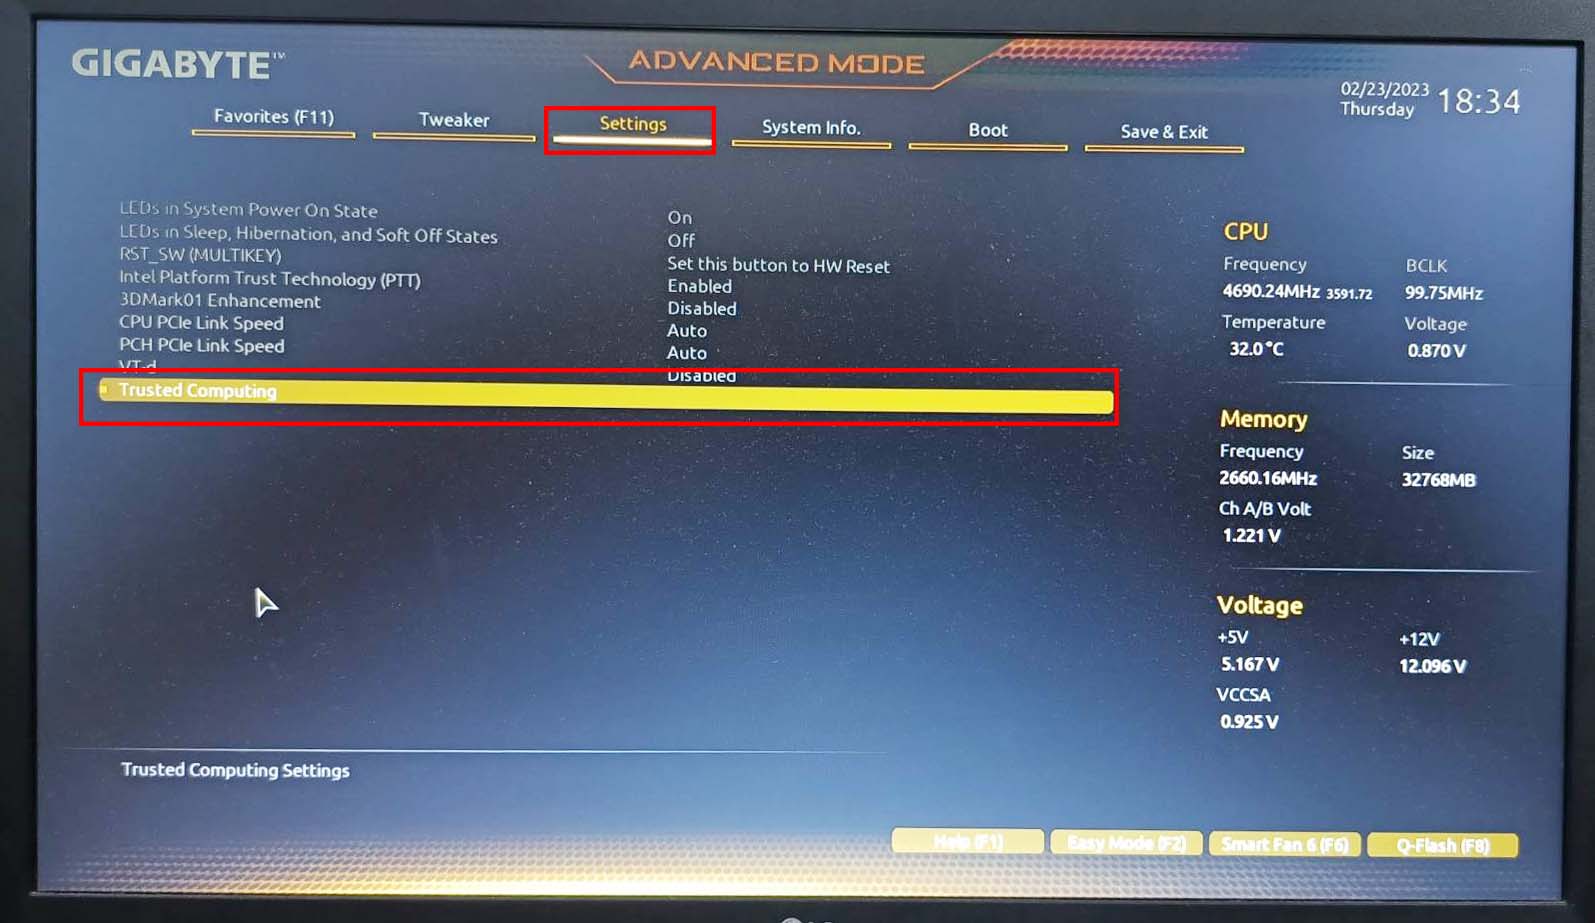 Locate trusted computing on BIOS of motherboard in Settings screen